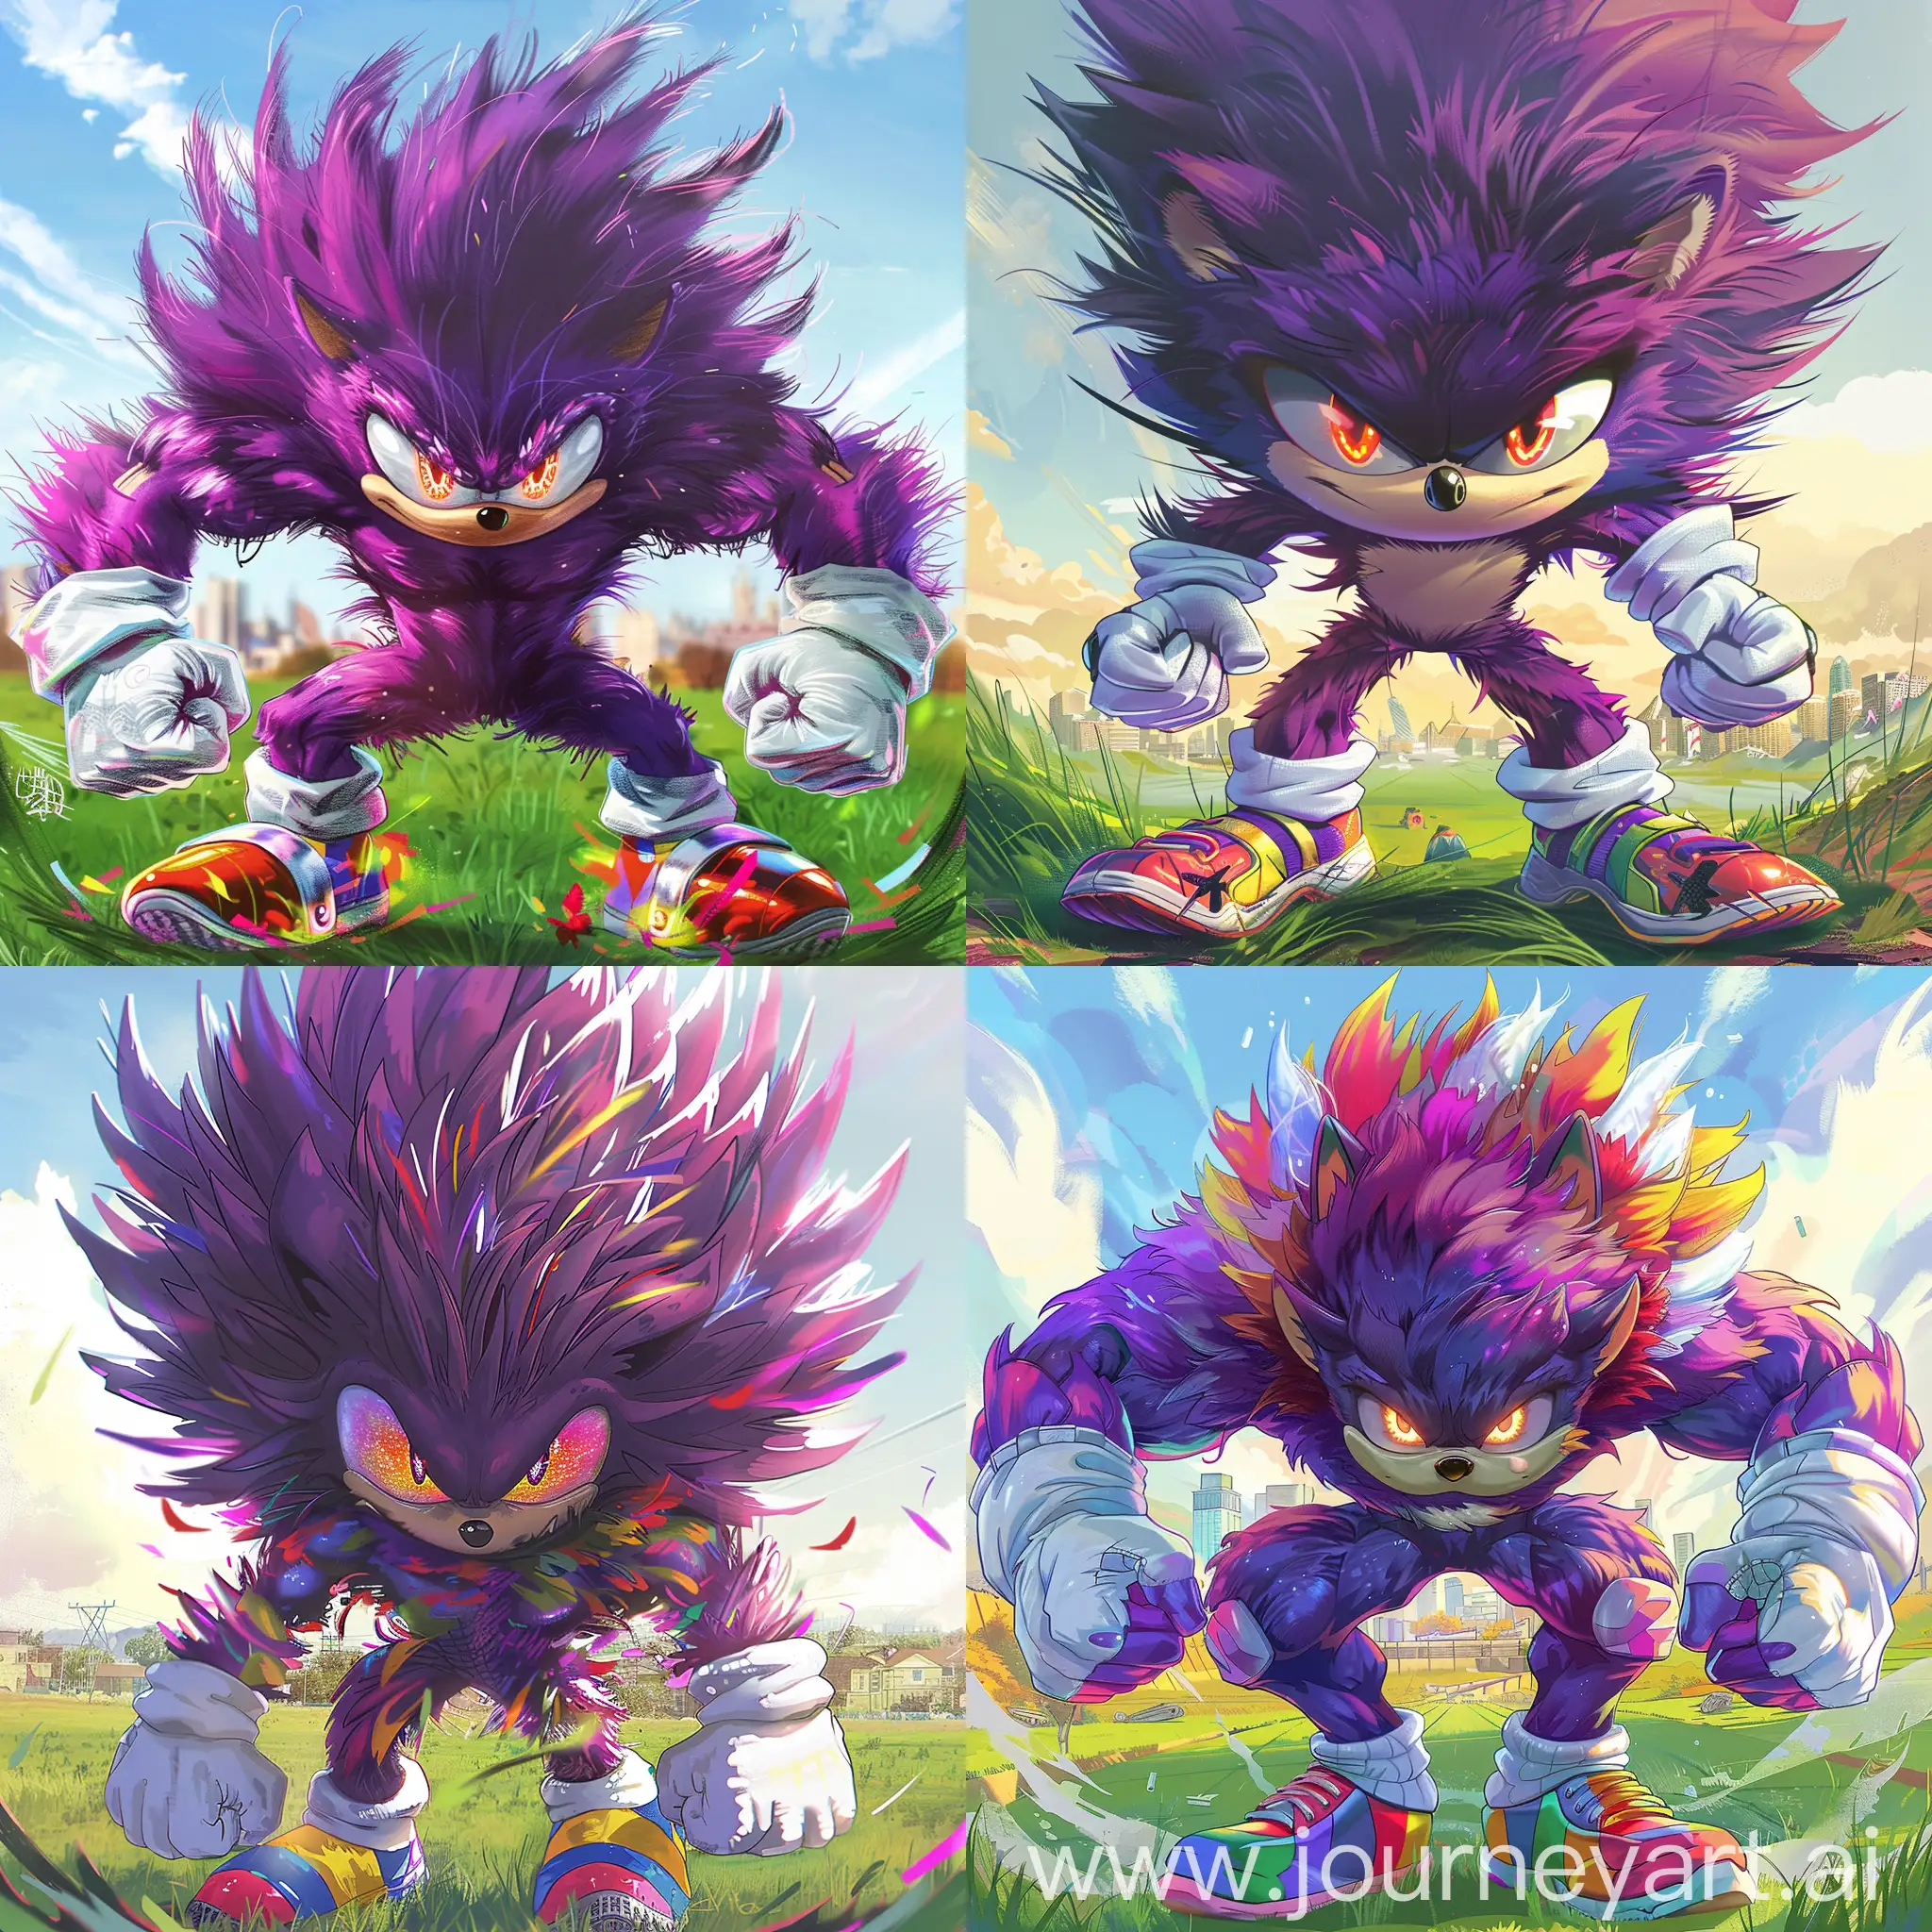 Muscular-Purple-Hedgehog-with-Glowing-Eyes-in-Vibrant-Sunny-Field